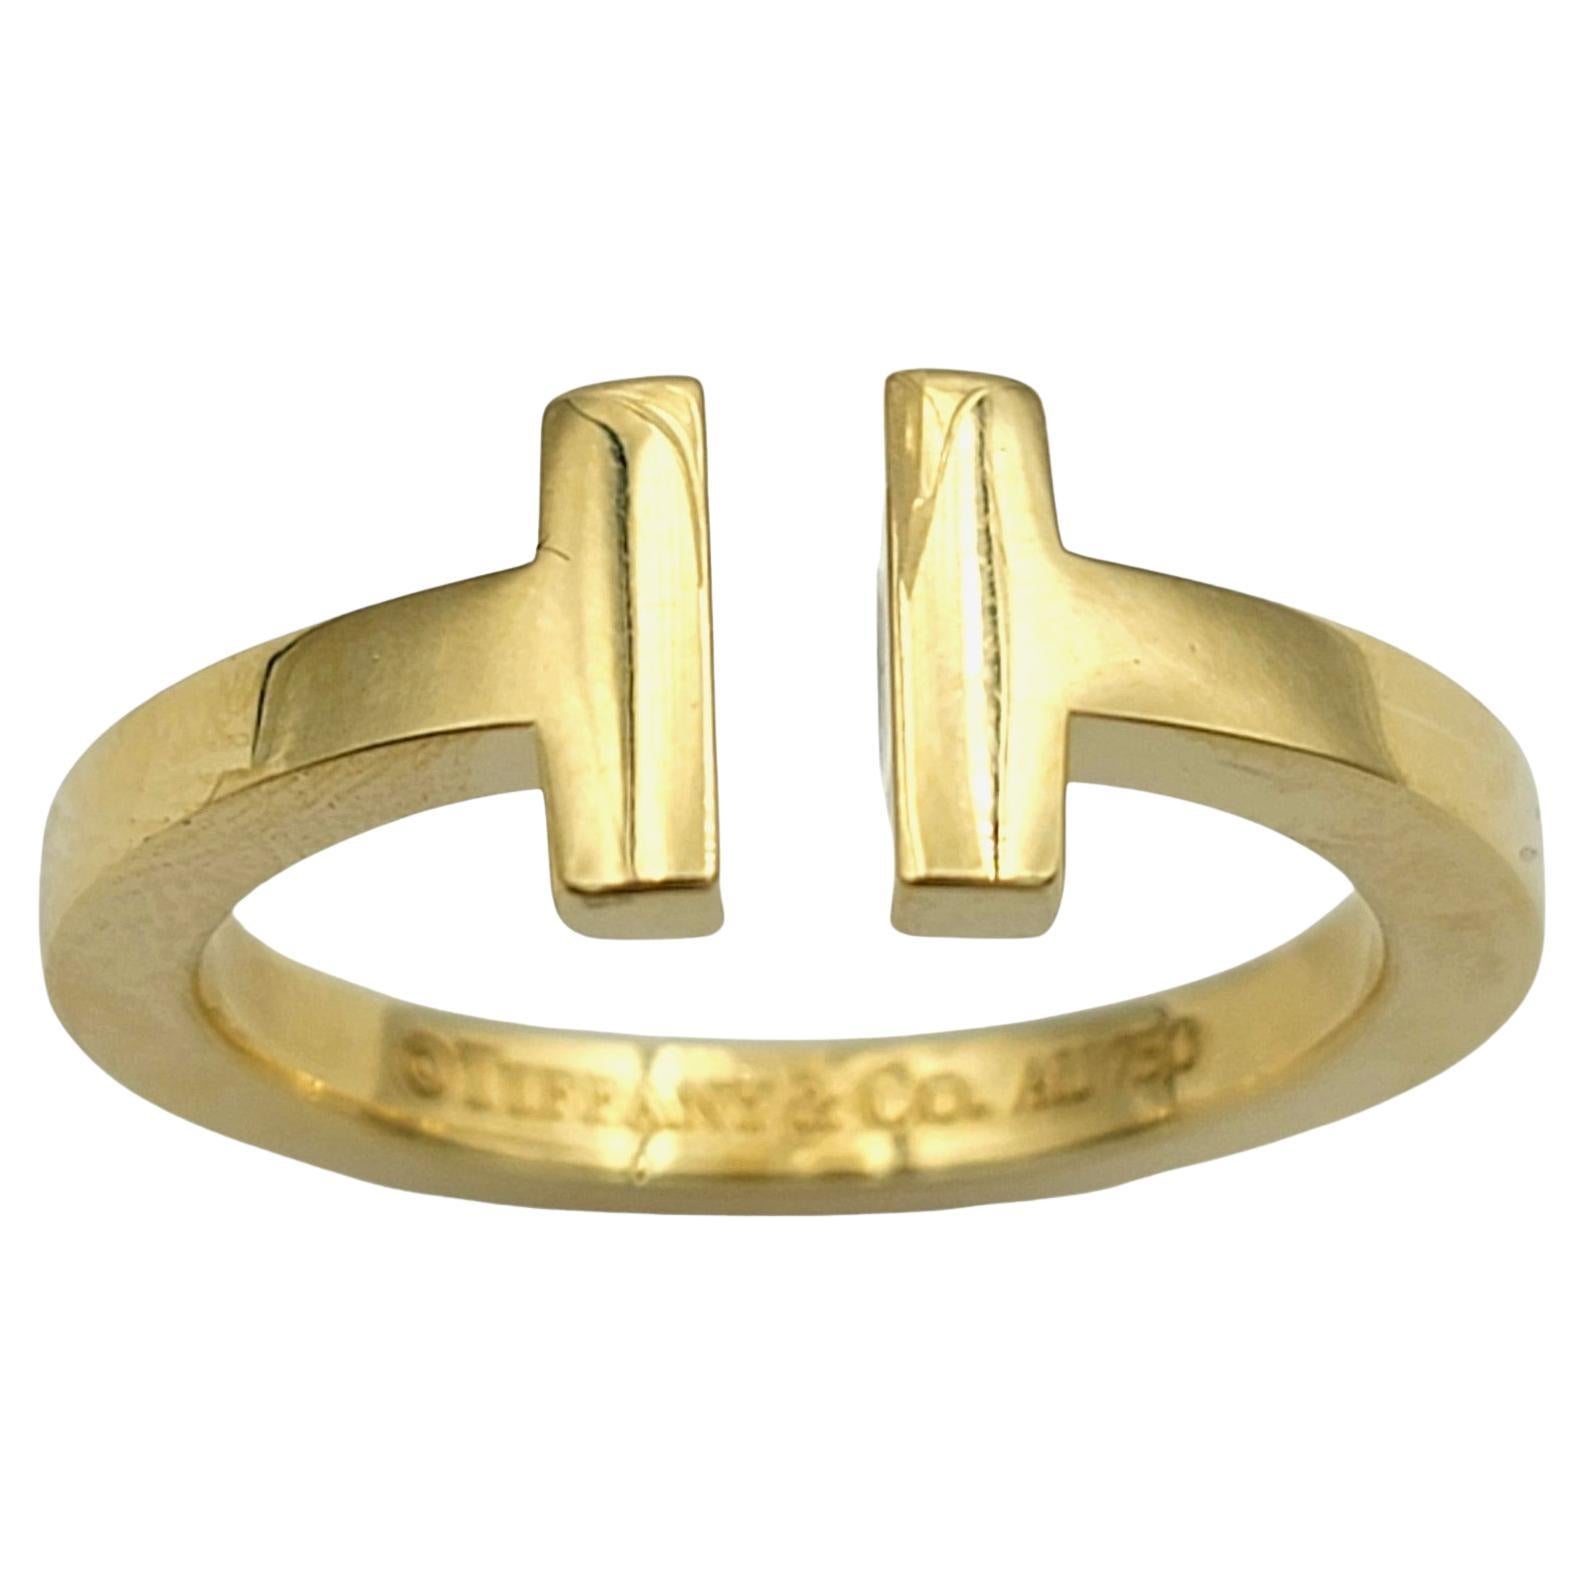 Tiffany & Co. Tiffany T Square High Polished Band Ring in 18 Karat Yellow Gold